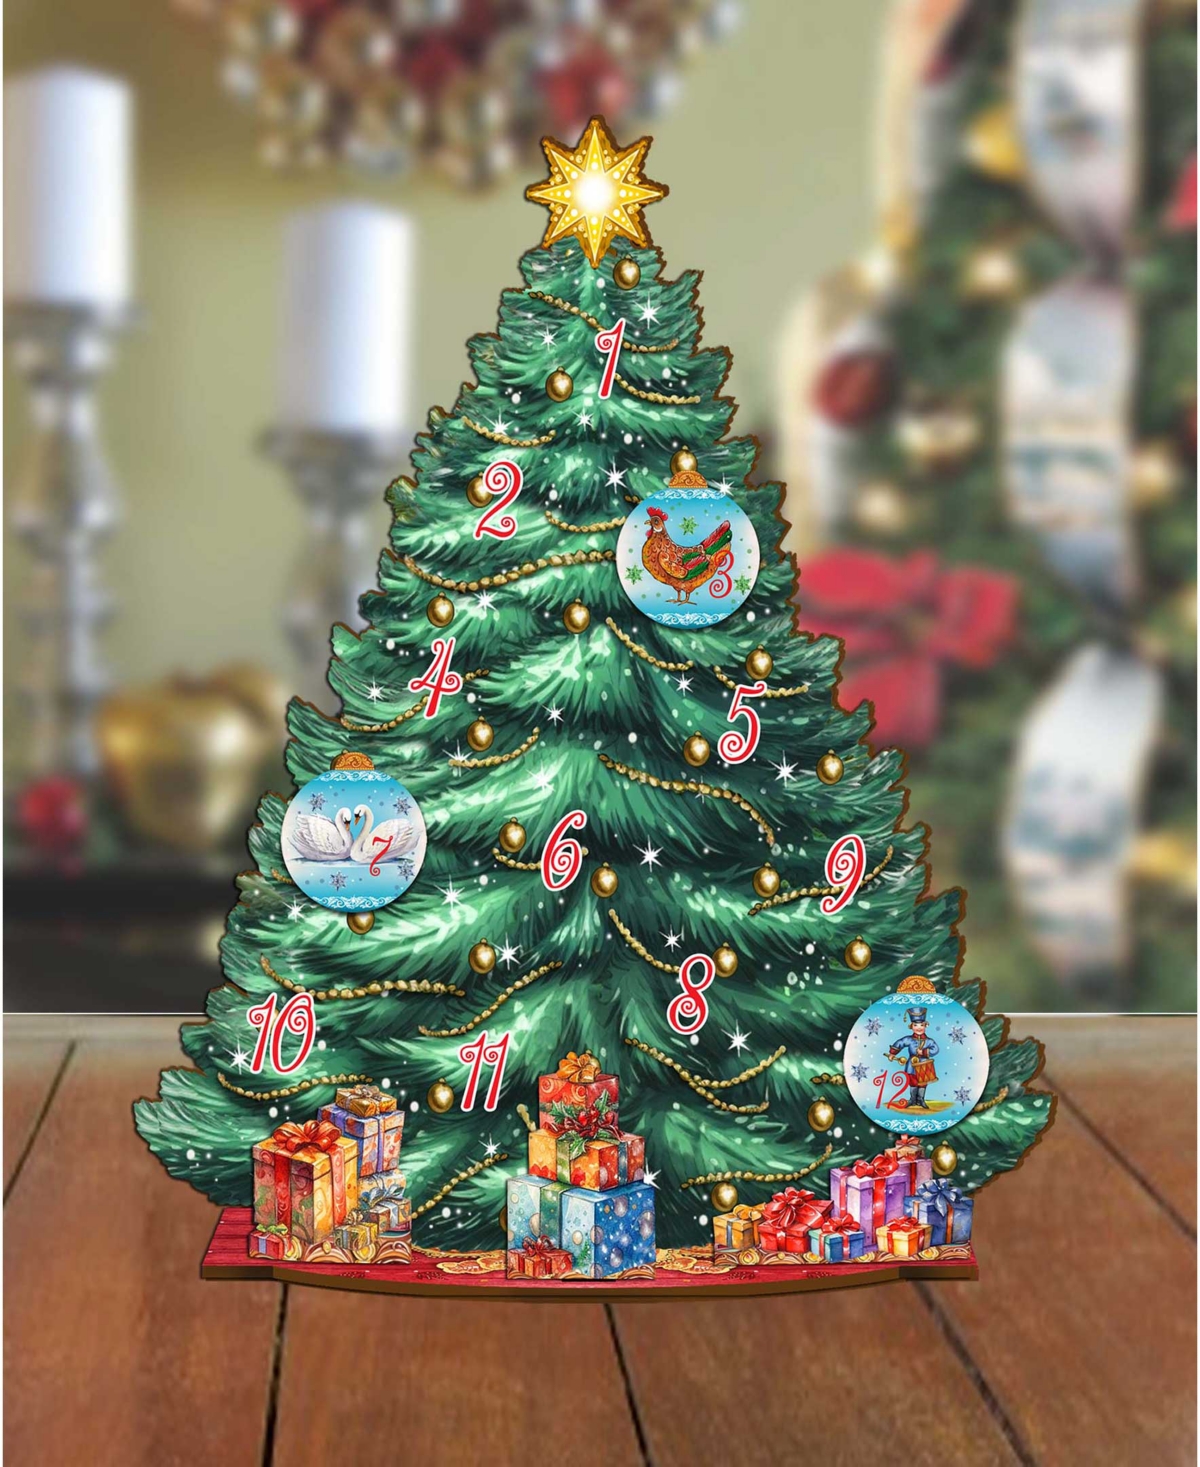 Shop Designocracy 12 Days Themed Wooden Christmas Tree With Ornaments Set Of 19 G. Debrekht In Multi Color